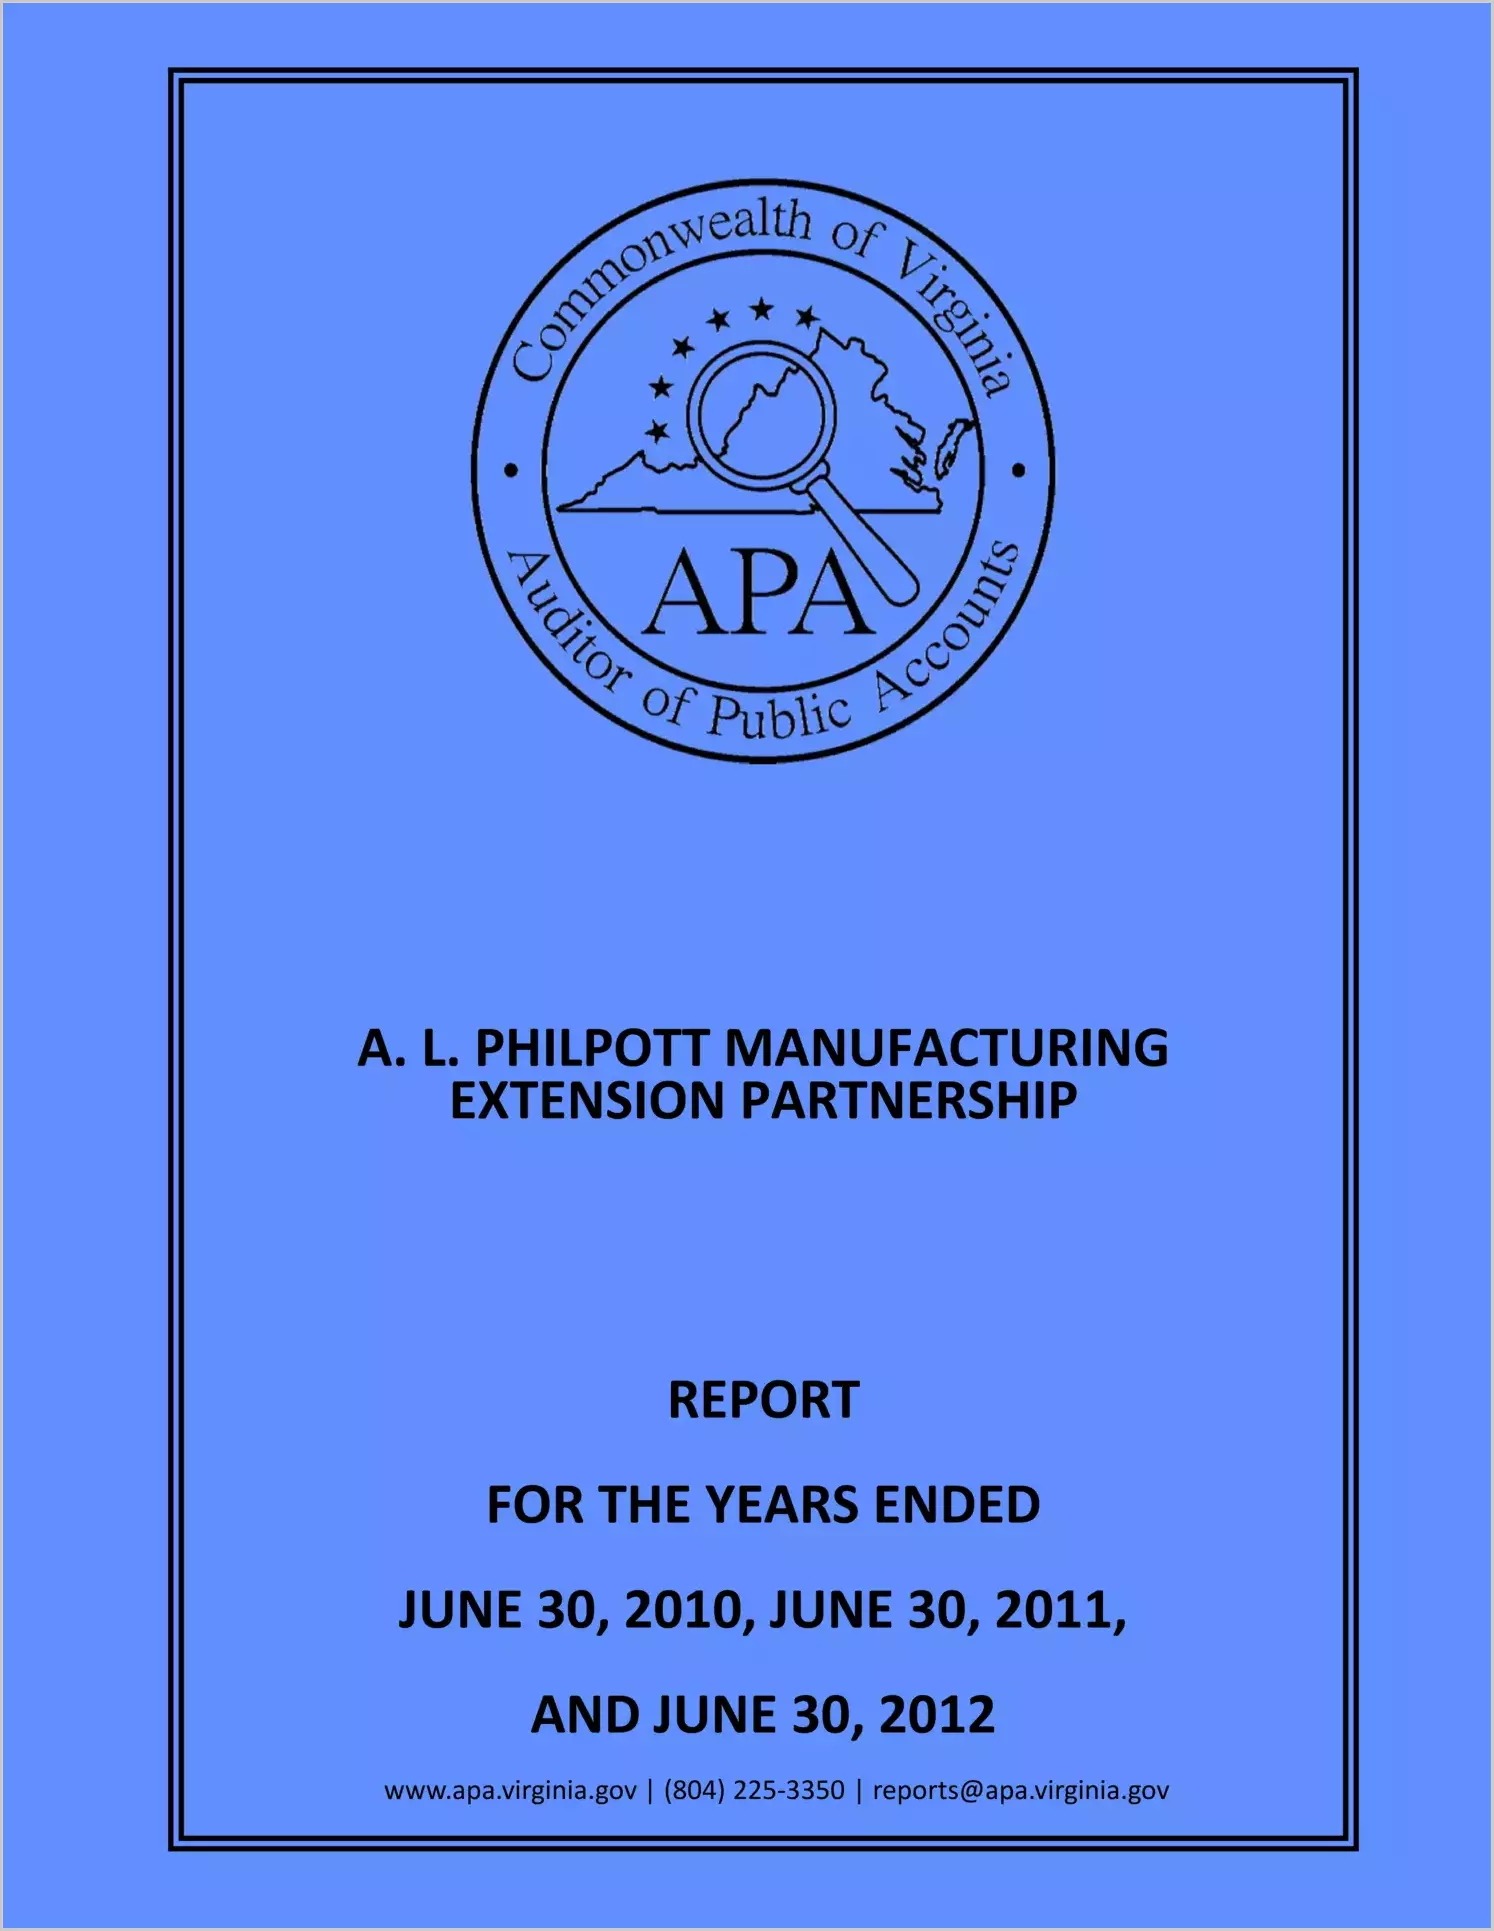 A.L. Philpott Manufacturing Extension Partnership report on Audit for the years ended June 30, 2010, June 30, 2011, and 2012